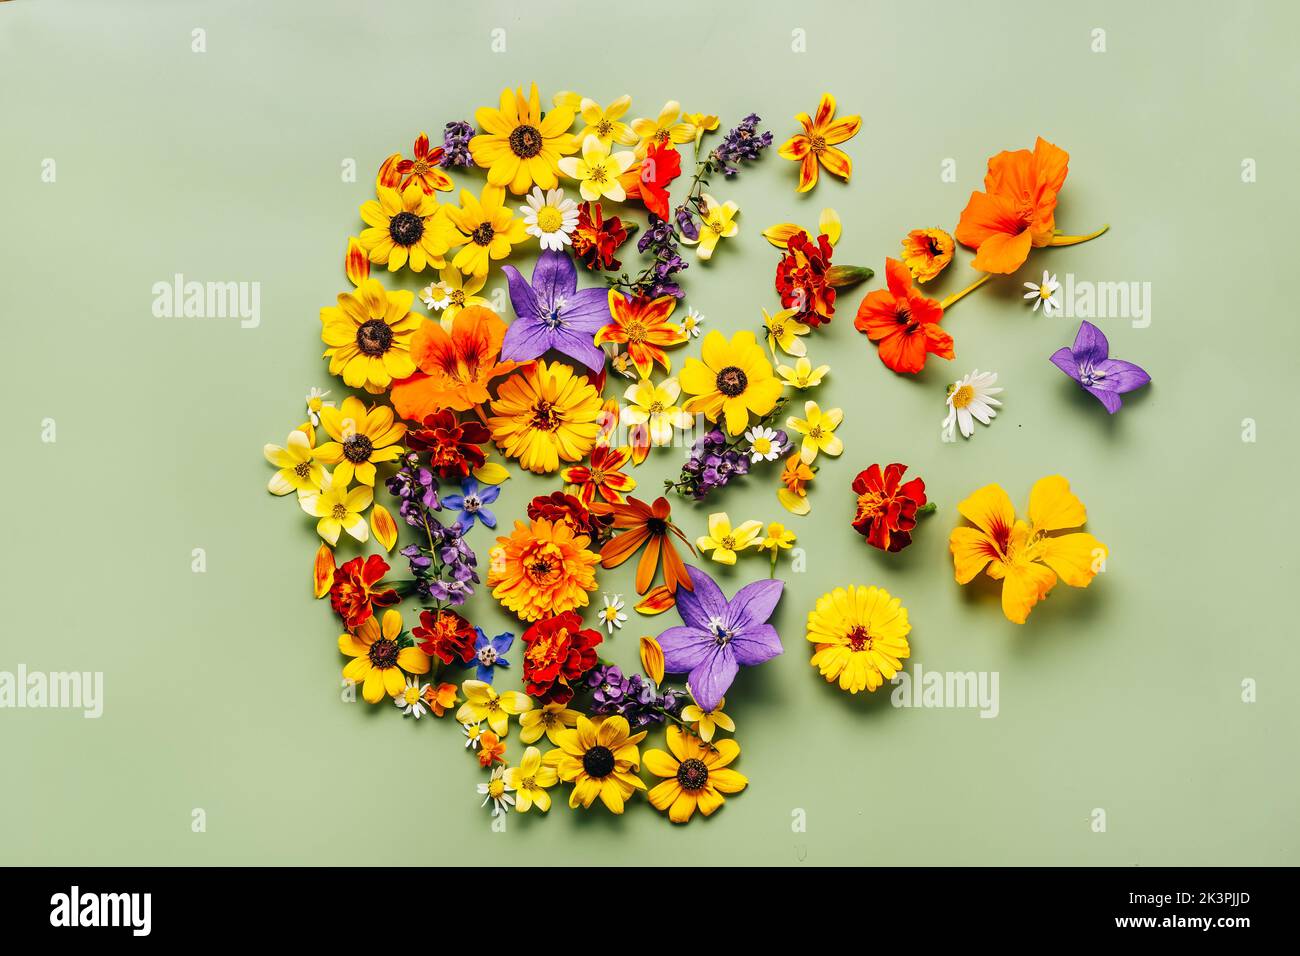 Human head symbol with orange, blue and yellow flowers on green background. Mental health, emotional wellness, contented emotions, self care, psychology, green thinking, ecology concept Stock Photo